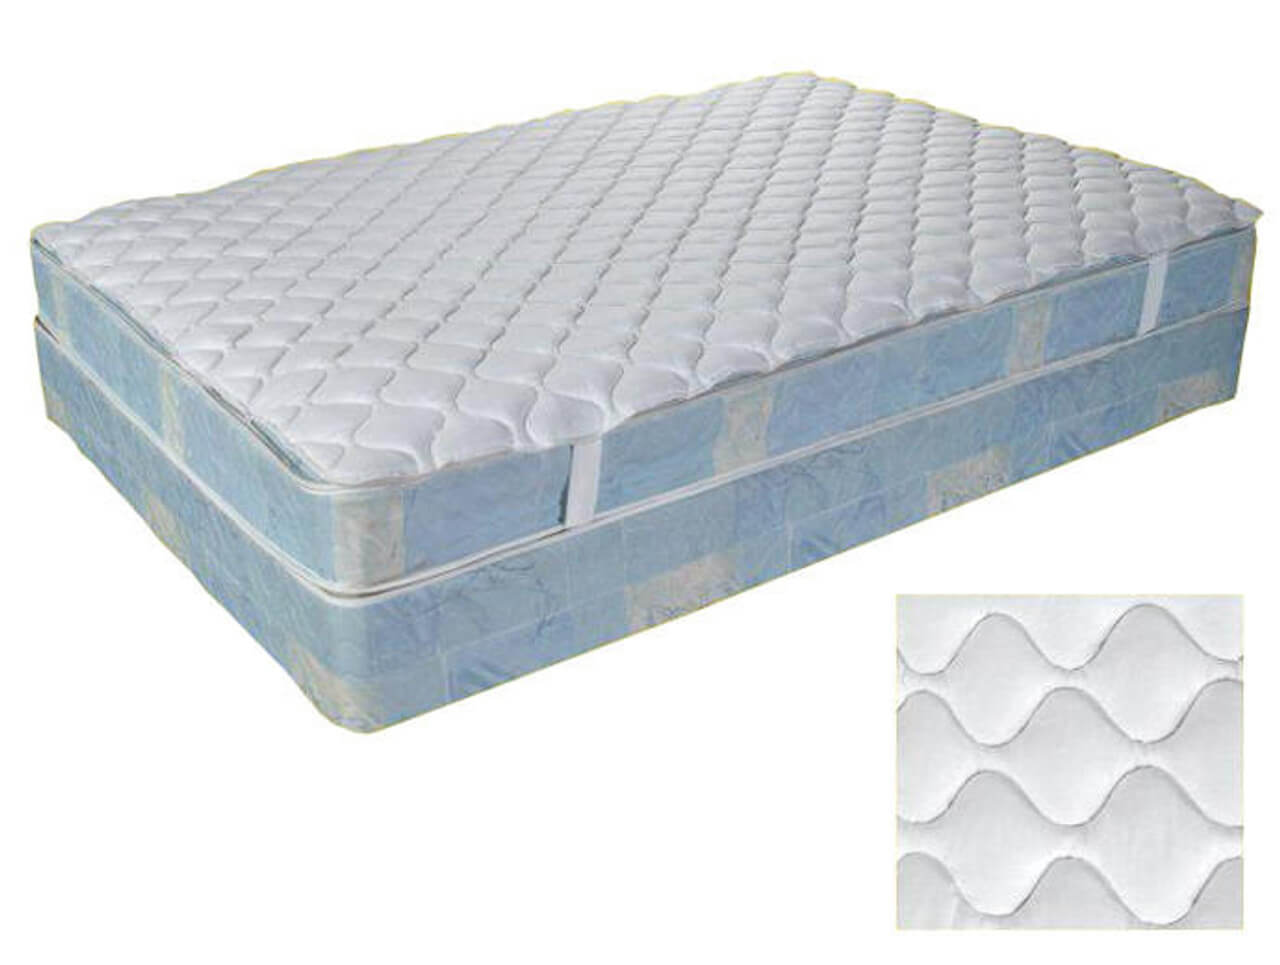 Choosing the Perfect Mattress Topper to Transform your Sleep